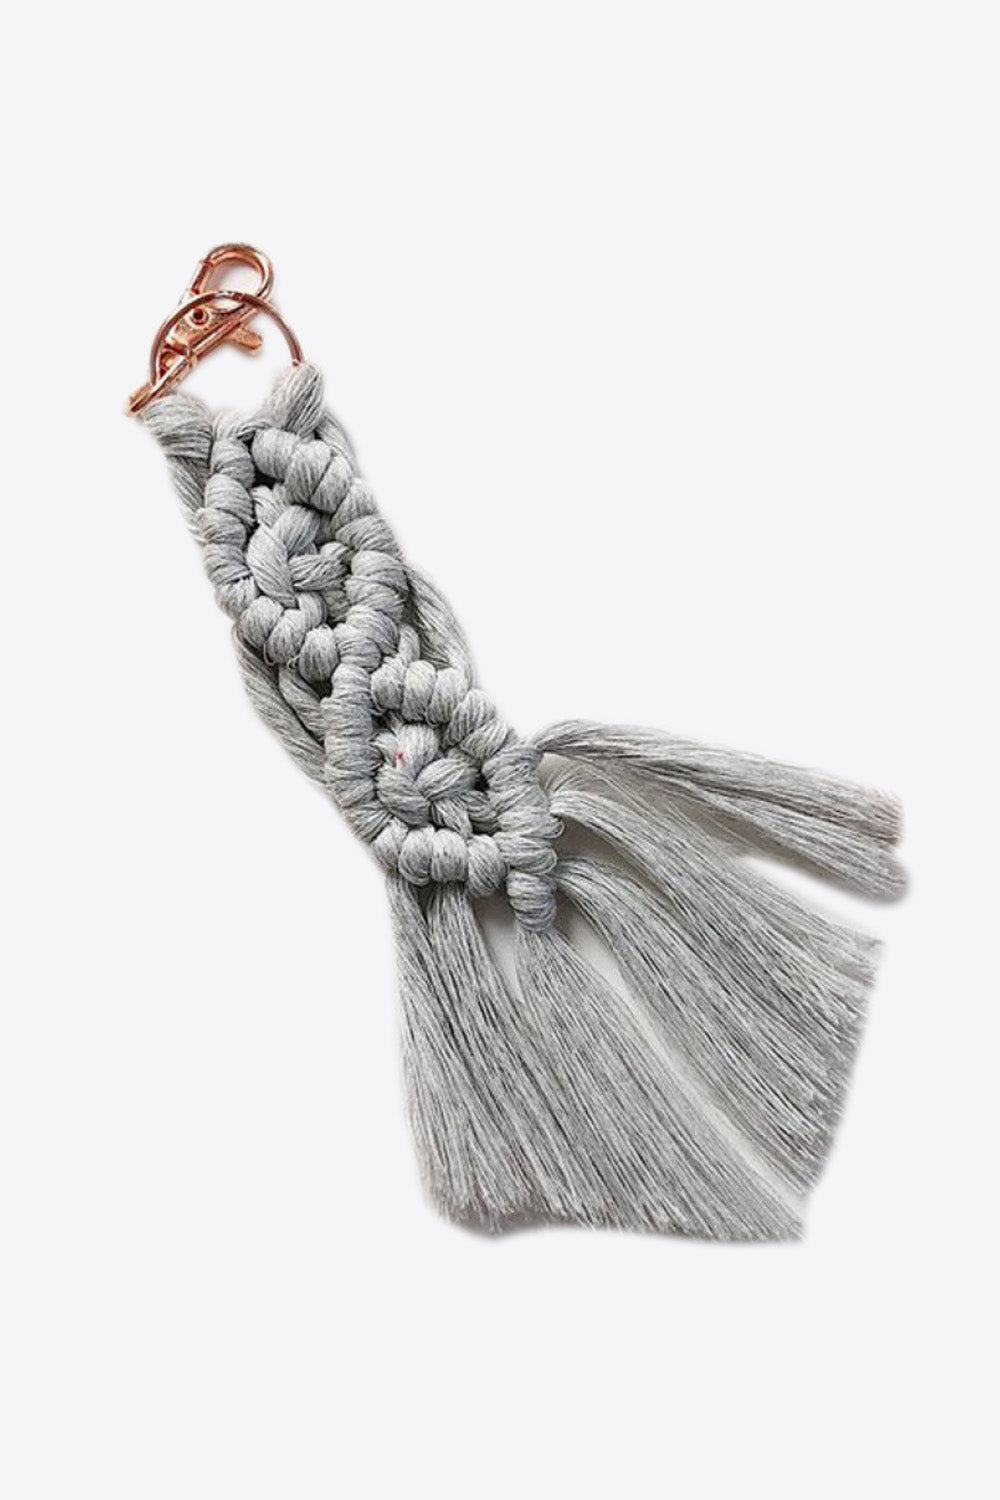 Trendsi Cupid Beauty Supplies Mid Gray / One Size Keychains Assorted 4-Pack Macrame Fringe Keychain